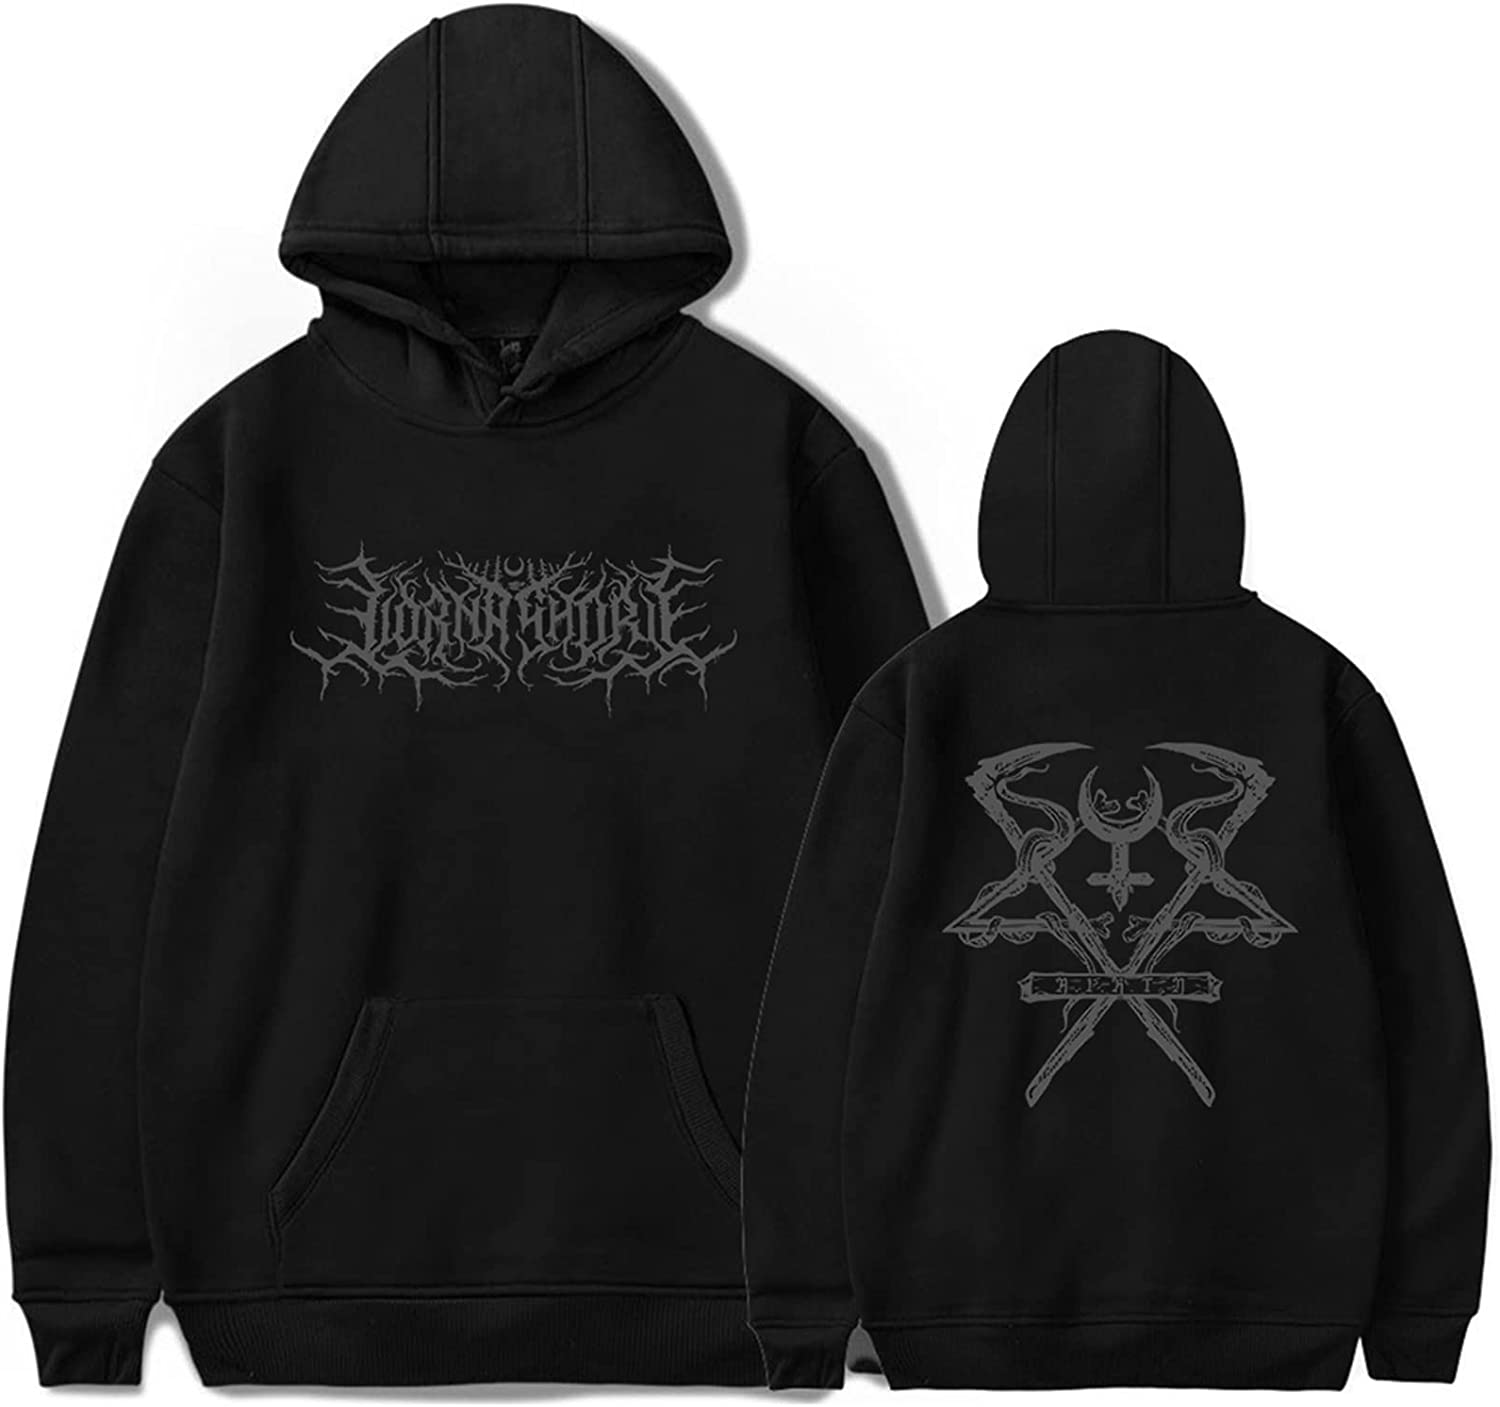 Lorna Shore Hoodies – Logo Printed Front Pullover Colorful Hoodie - Lorna Shore Store